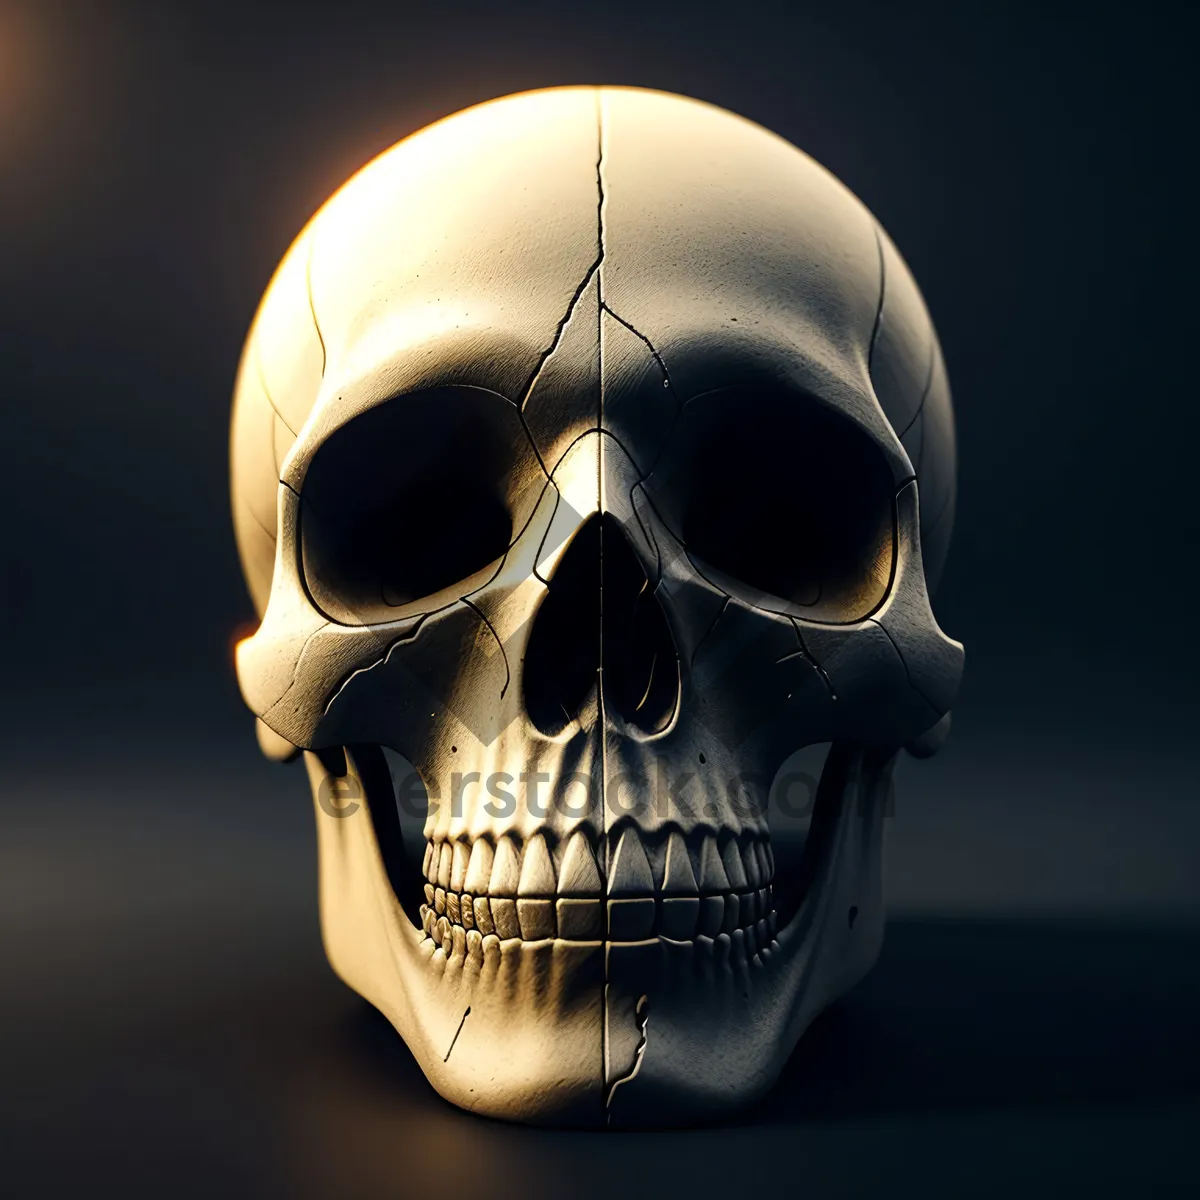 Picture of Eerie Pirate Skull - Bone-Chilling Anatomy of Death